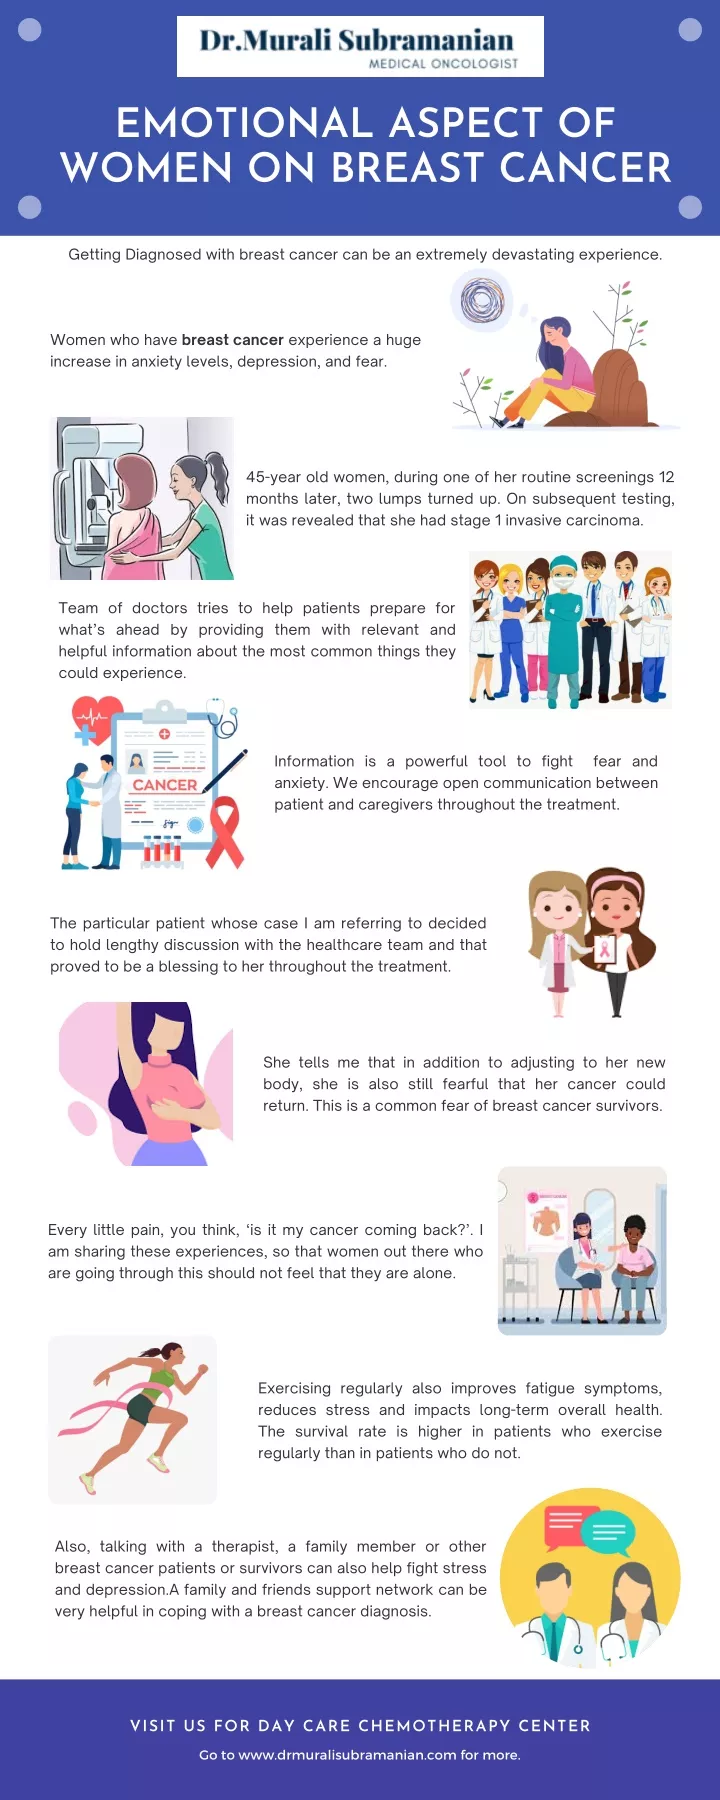 emotional aspect of women on breast cancer